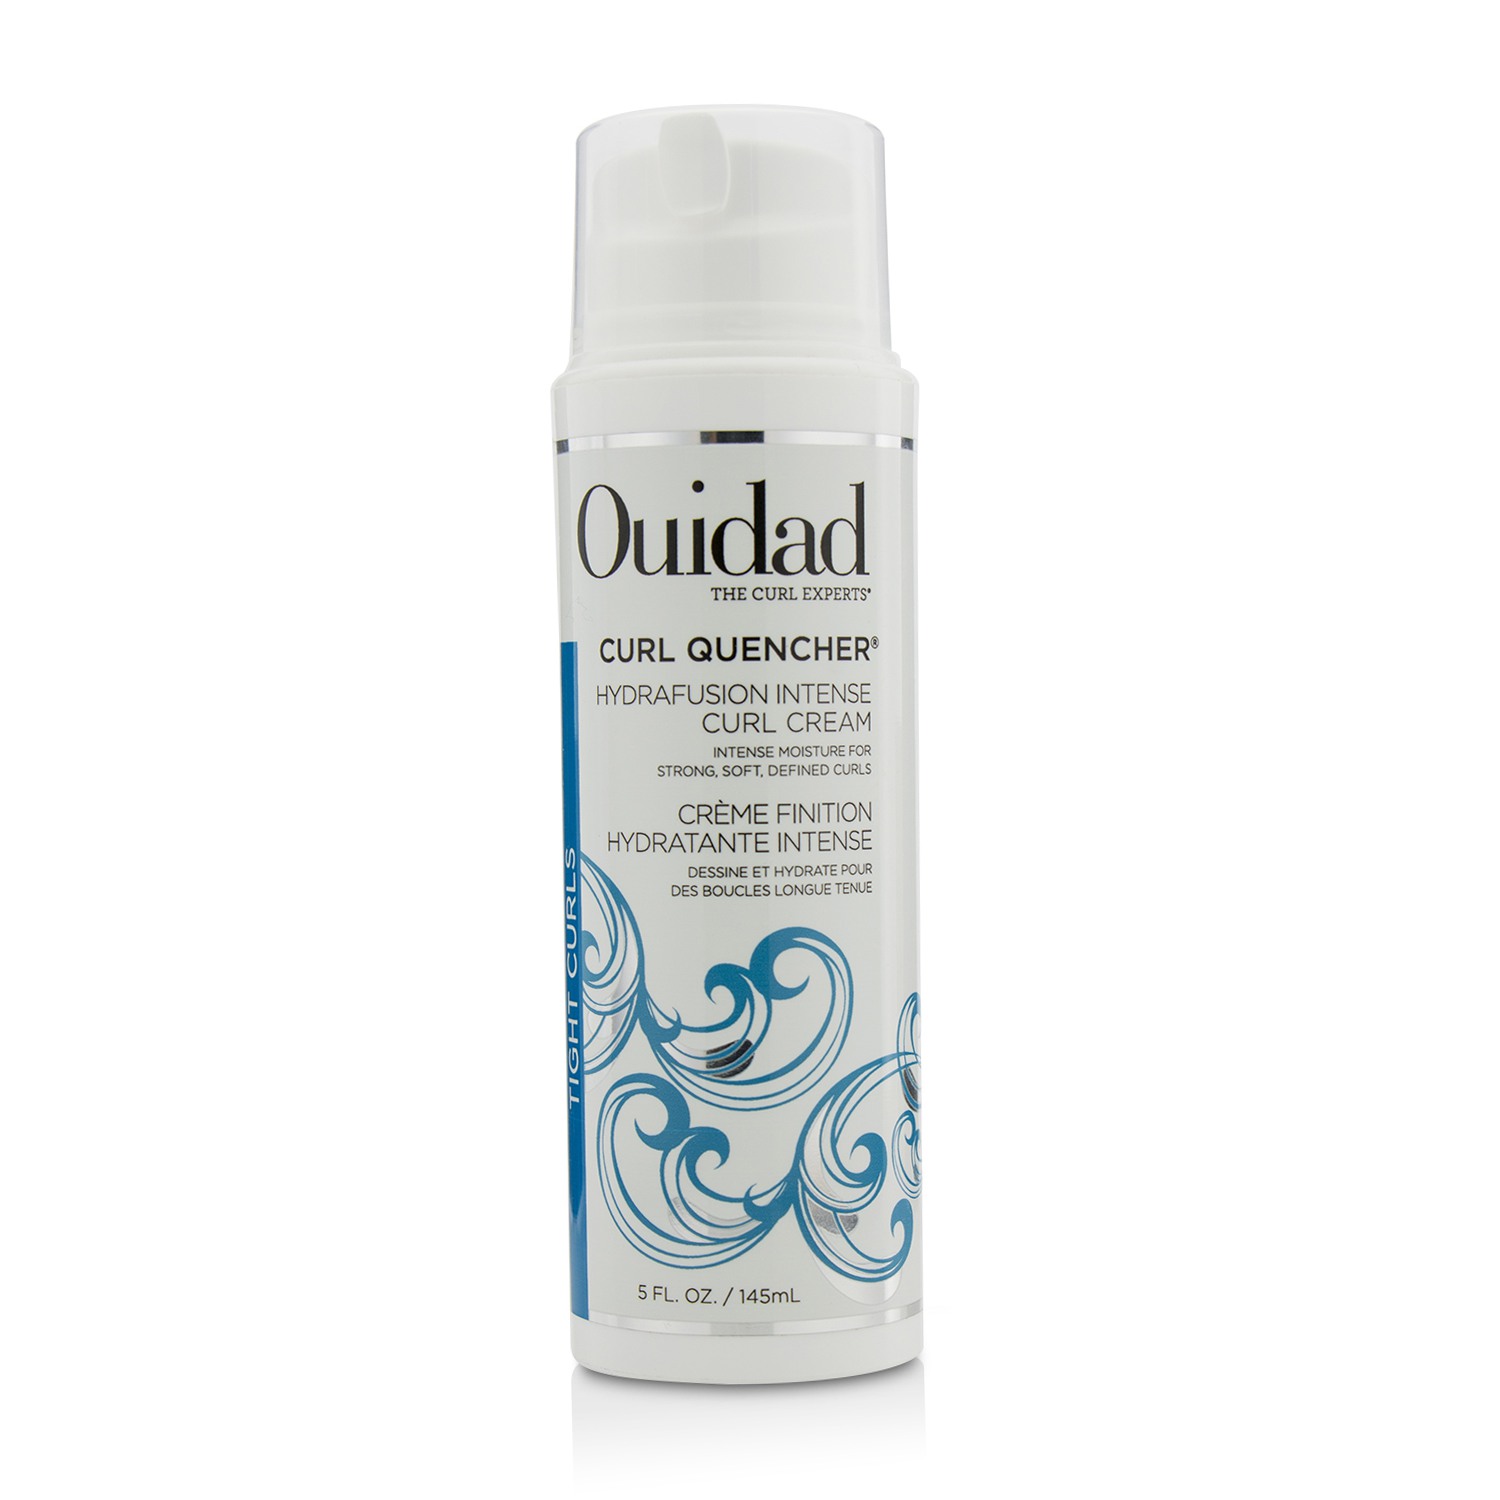 Curl Quencher Hydrafusion Intense Curl Cream (Tight Curls) Ouidad Image